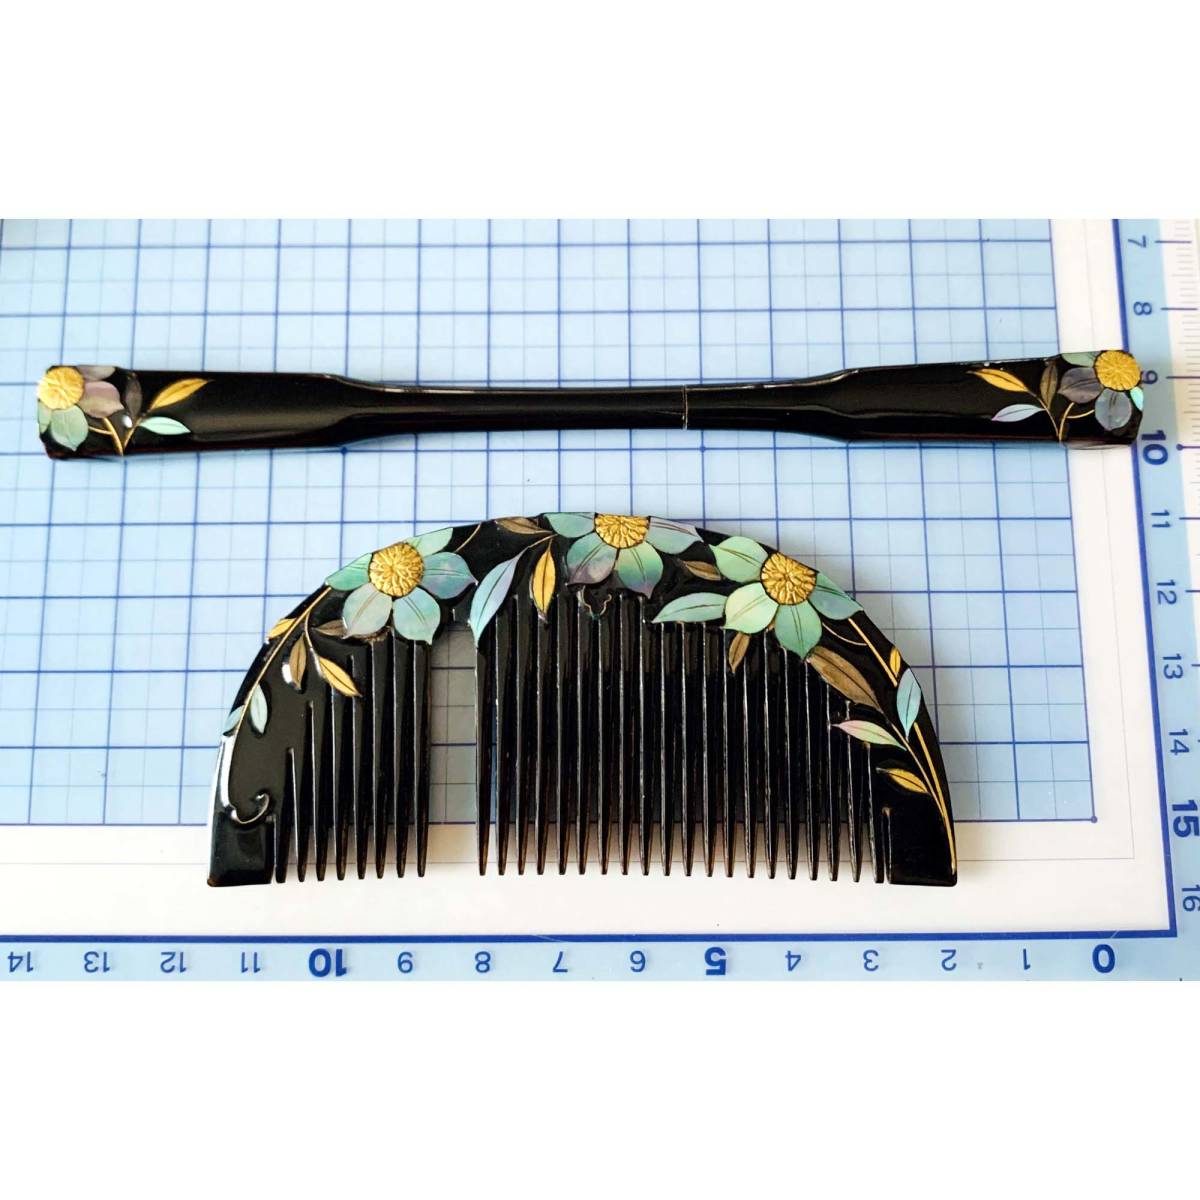 Vintage mother-of-pearl work, gold lacquer, hand-painted natural tortoiseshell comb, lacquer hairpin, value 2-piece set, retro, chipped No.5401, fashion, women's kimono, kimono, Hairpin